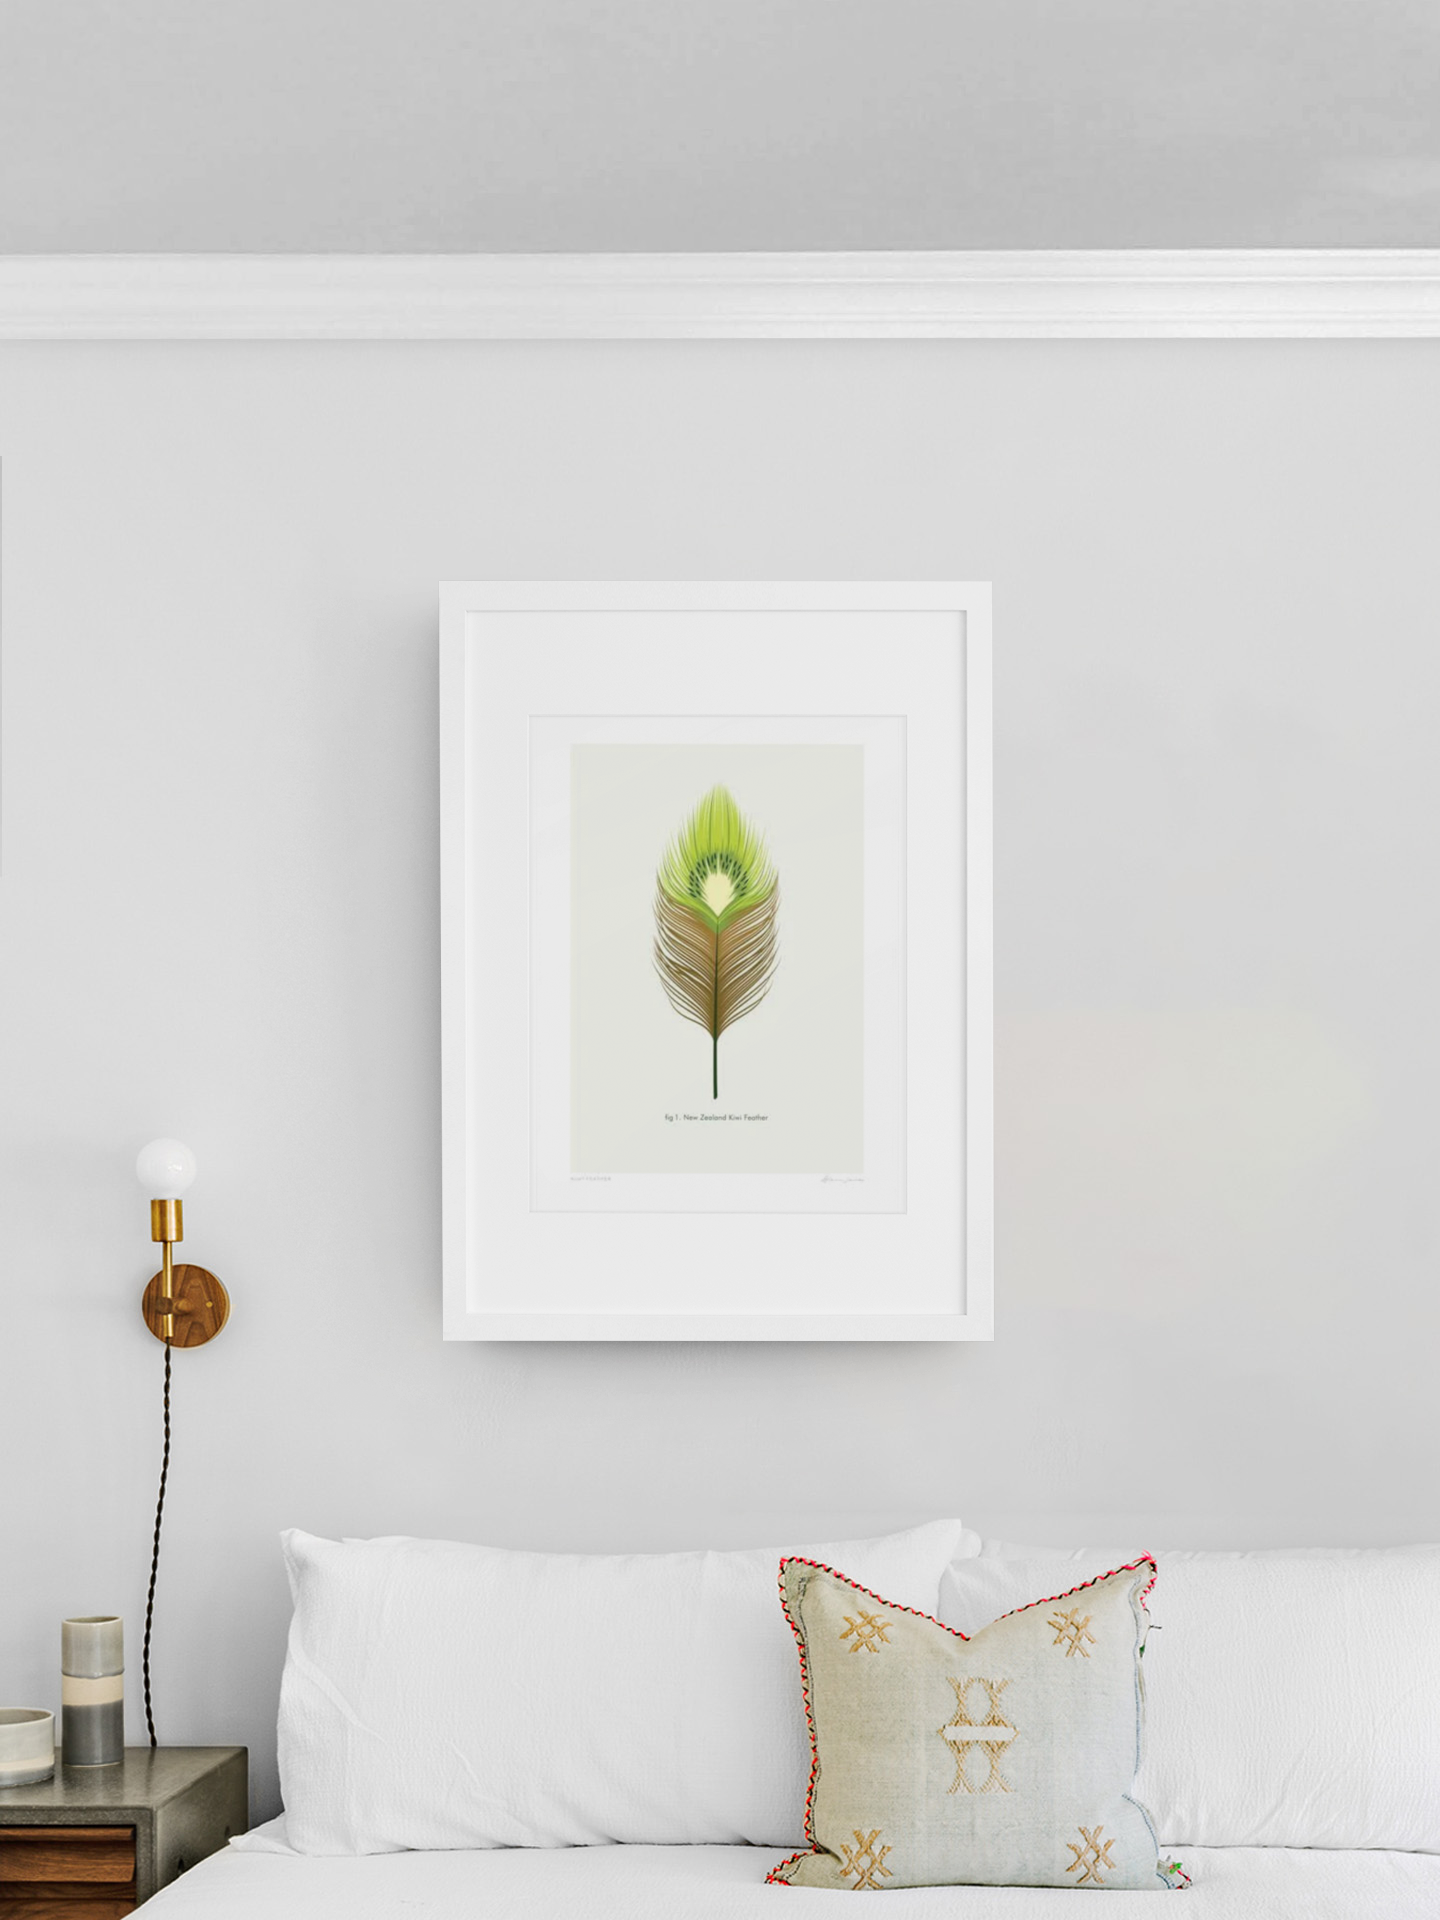 A single, vibrant green Kiwi Feather by Glenn Jones, a product of New Zealand, framed and displayed on a clean white wall above a cozy white sofa adorned with a decorative pillow, accompanied by a stylish wall-mounted.